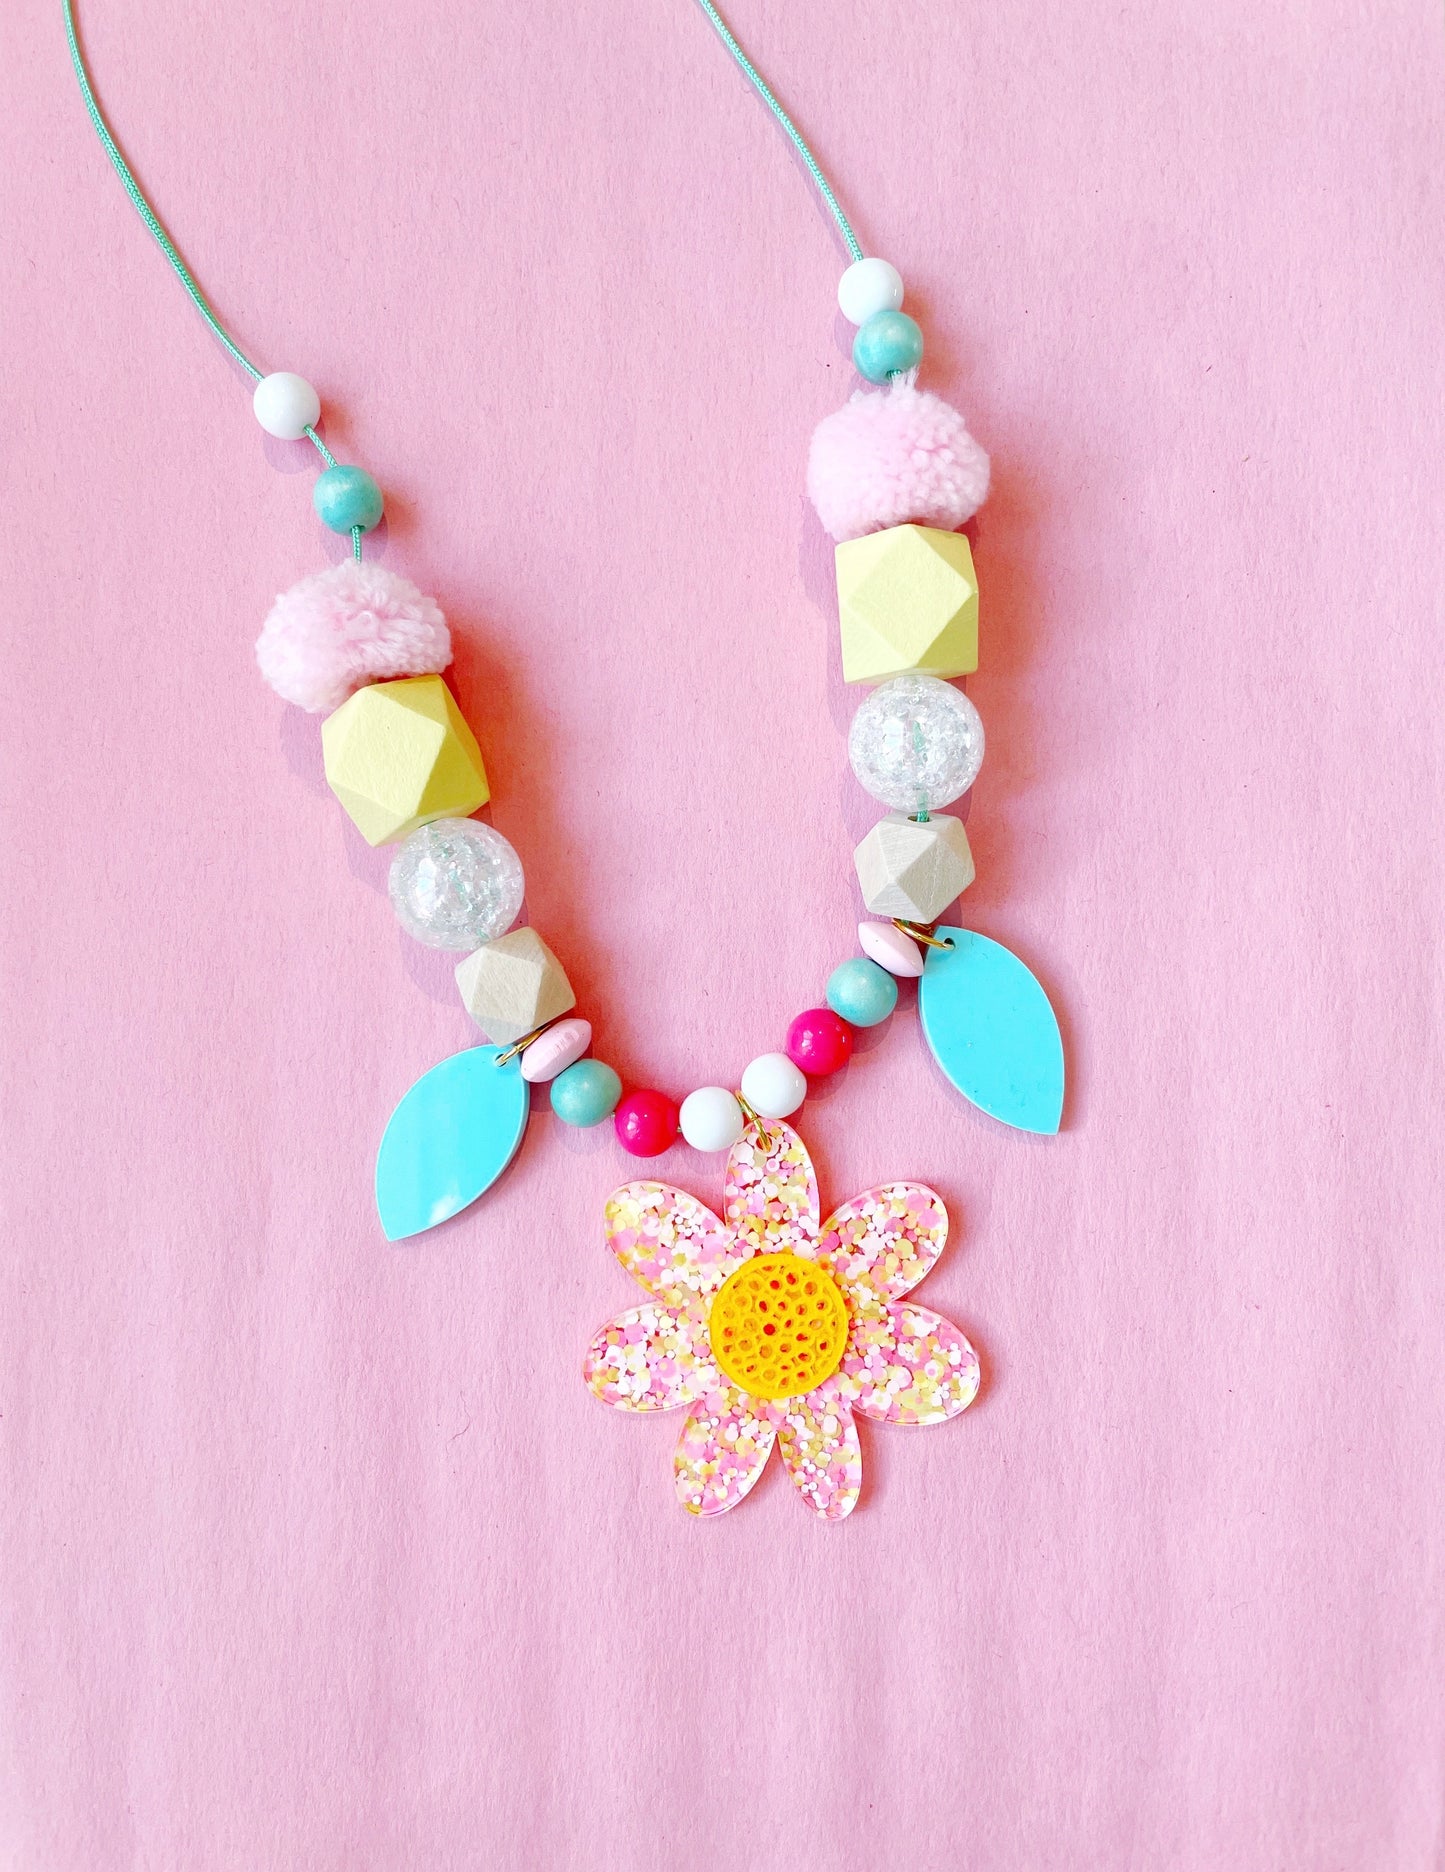 Load image into Gallery viewer, Daisy Chain Necklace
